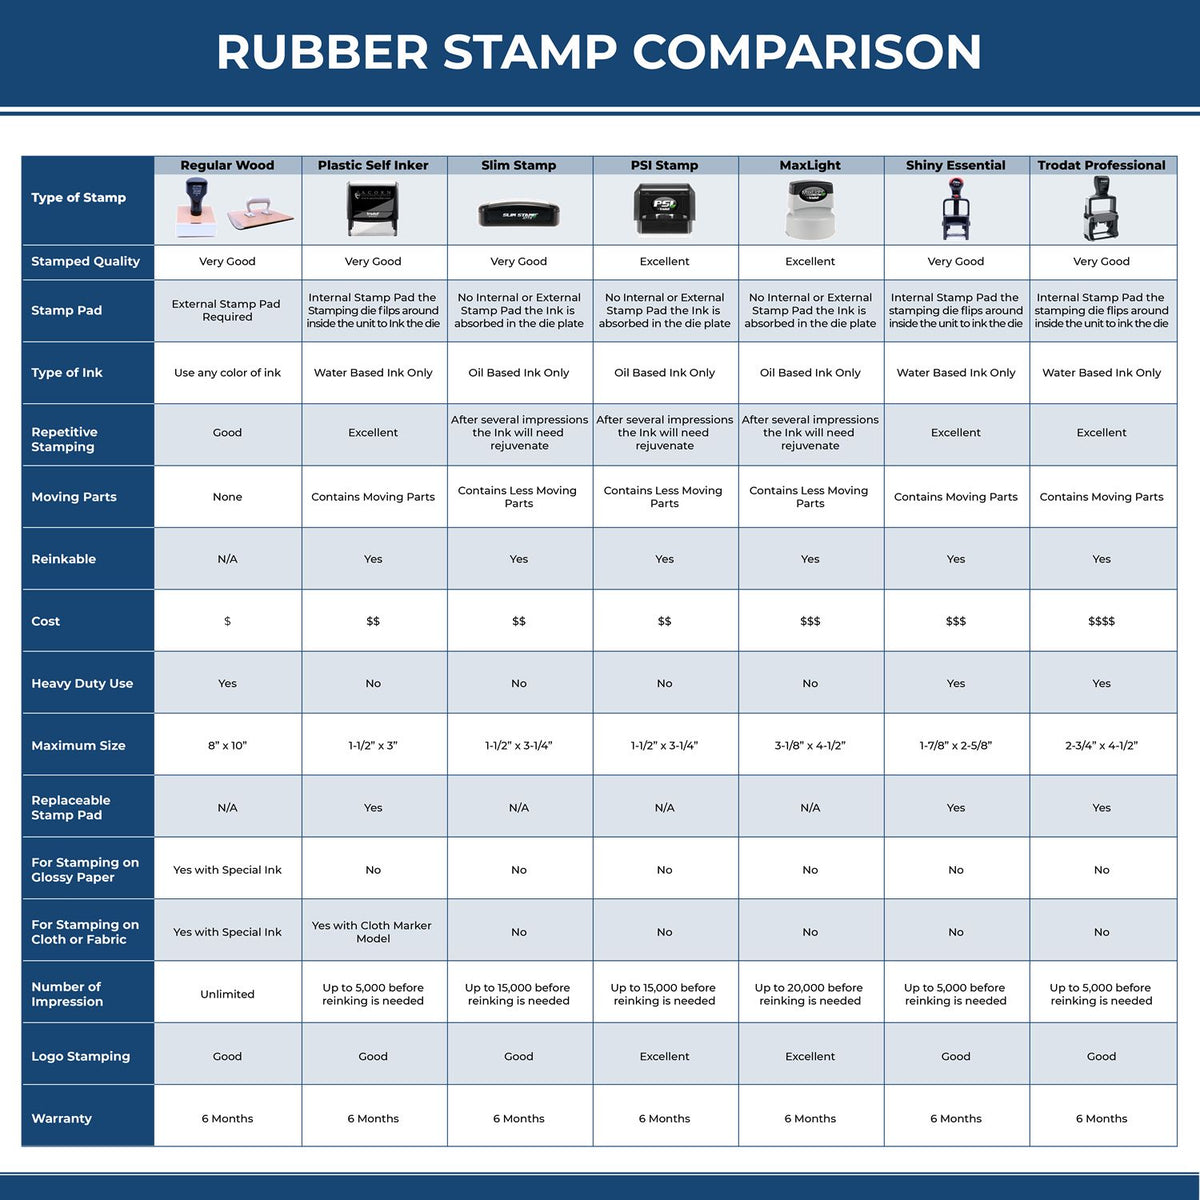 A comparison chart for the different types of mount models available for the Self-Inking District of Columbia PE Stamp.